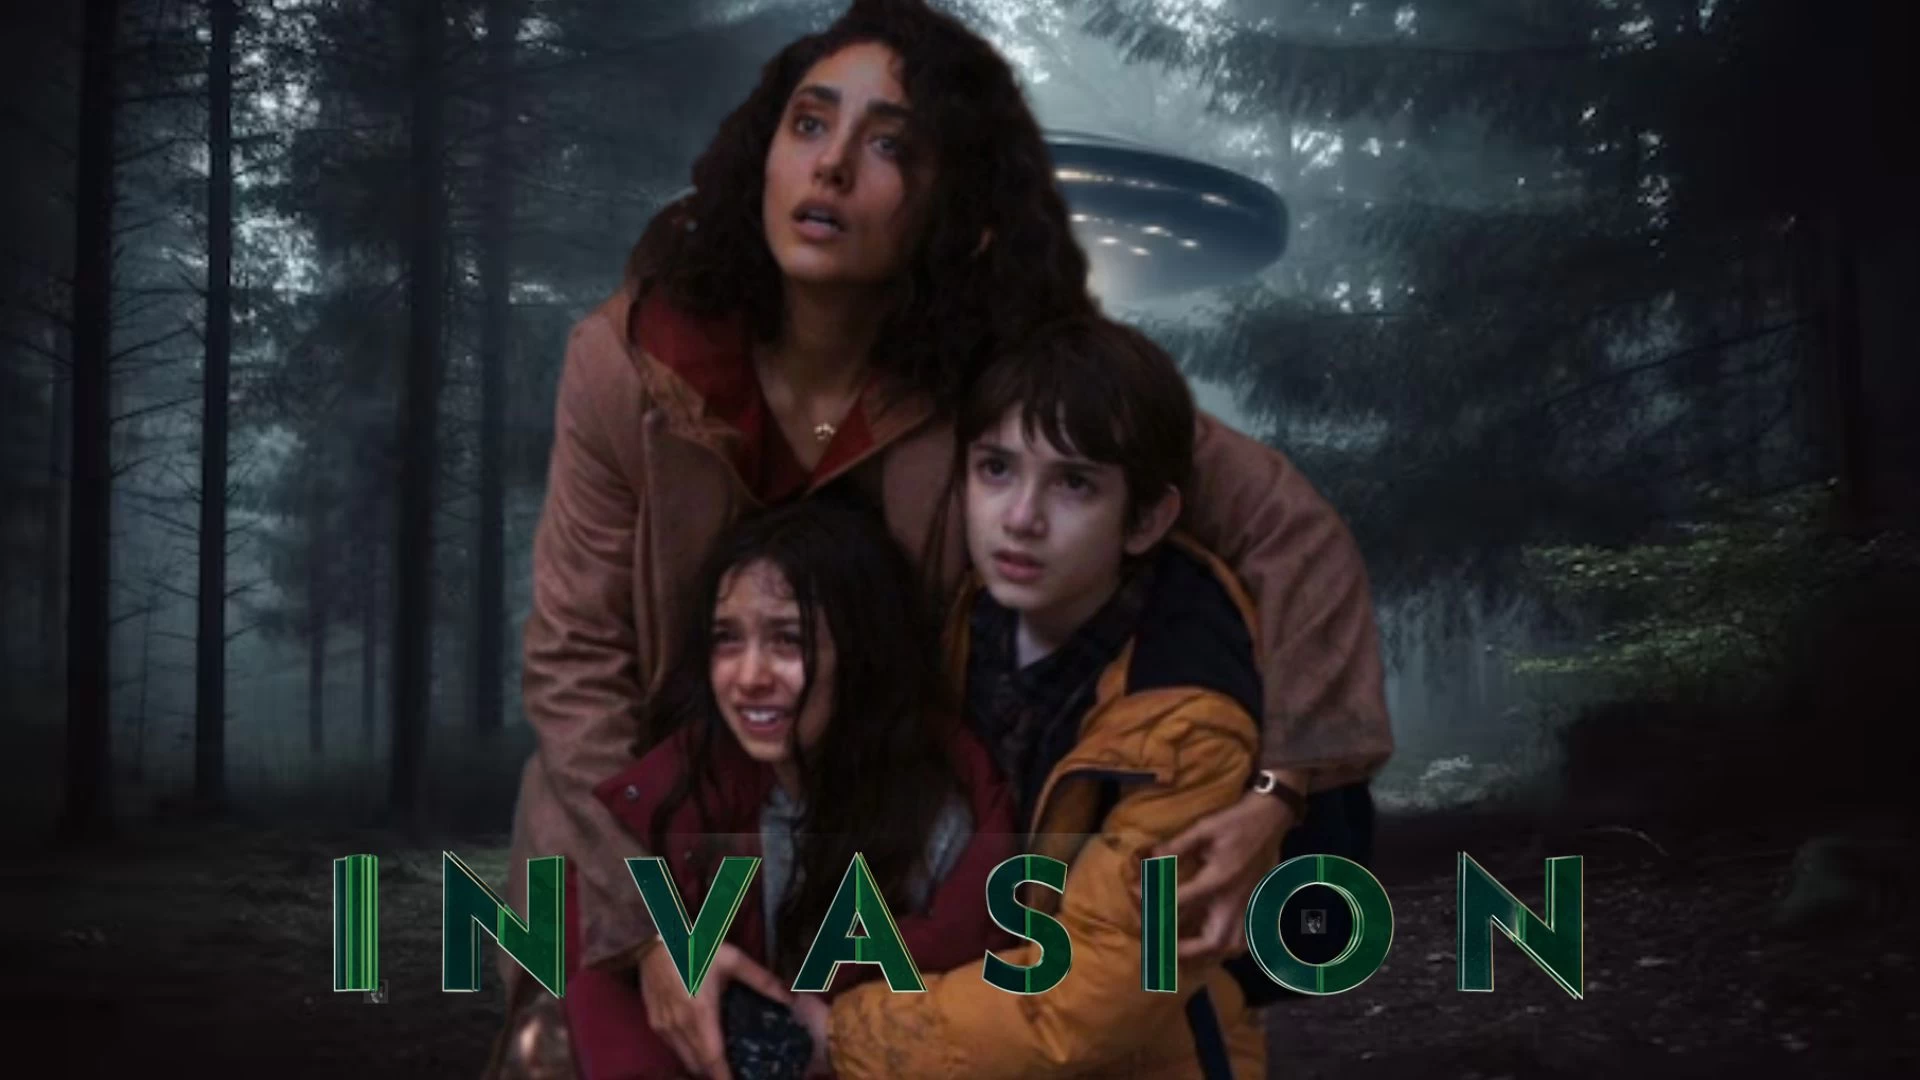 Invasion Season 2 Episode 8 Ending Explained, Release Date, Cast, Plot, Review, Where to Watch and More